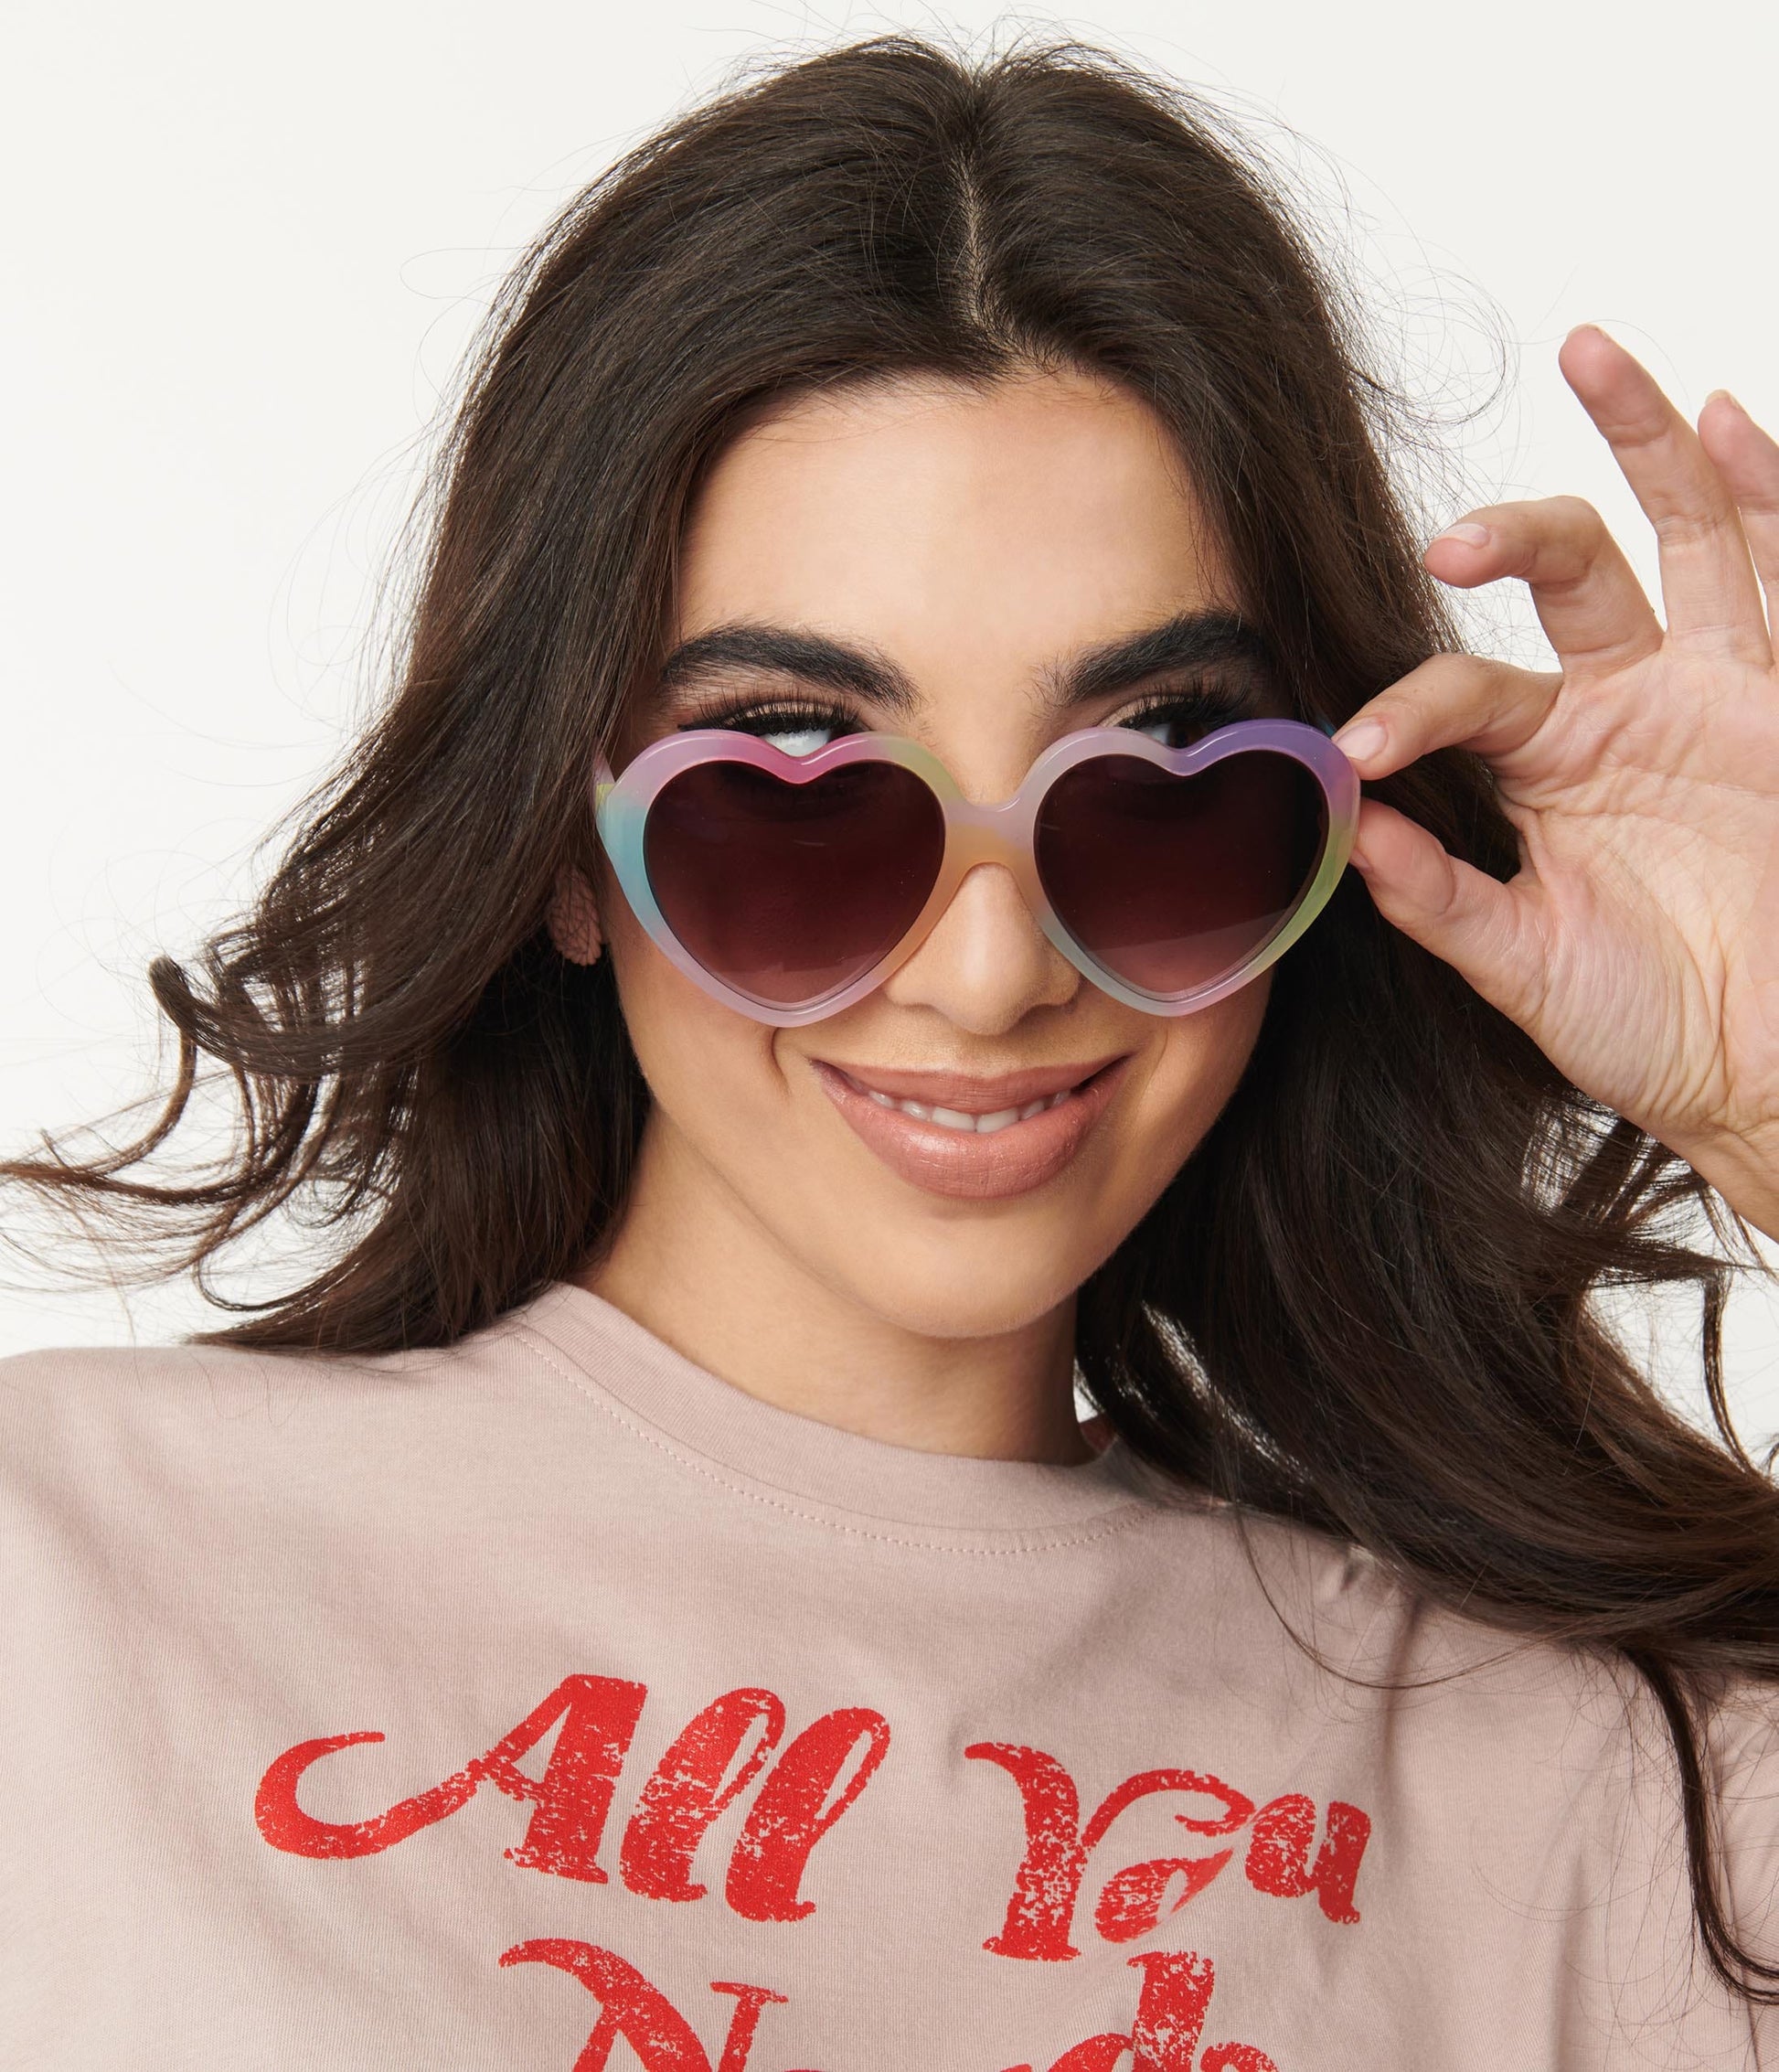 Pastel Rainbow Ombre Candy Heart Sunglasses